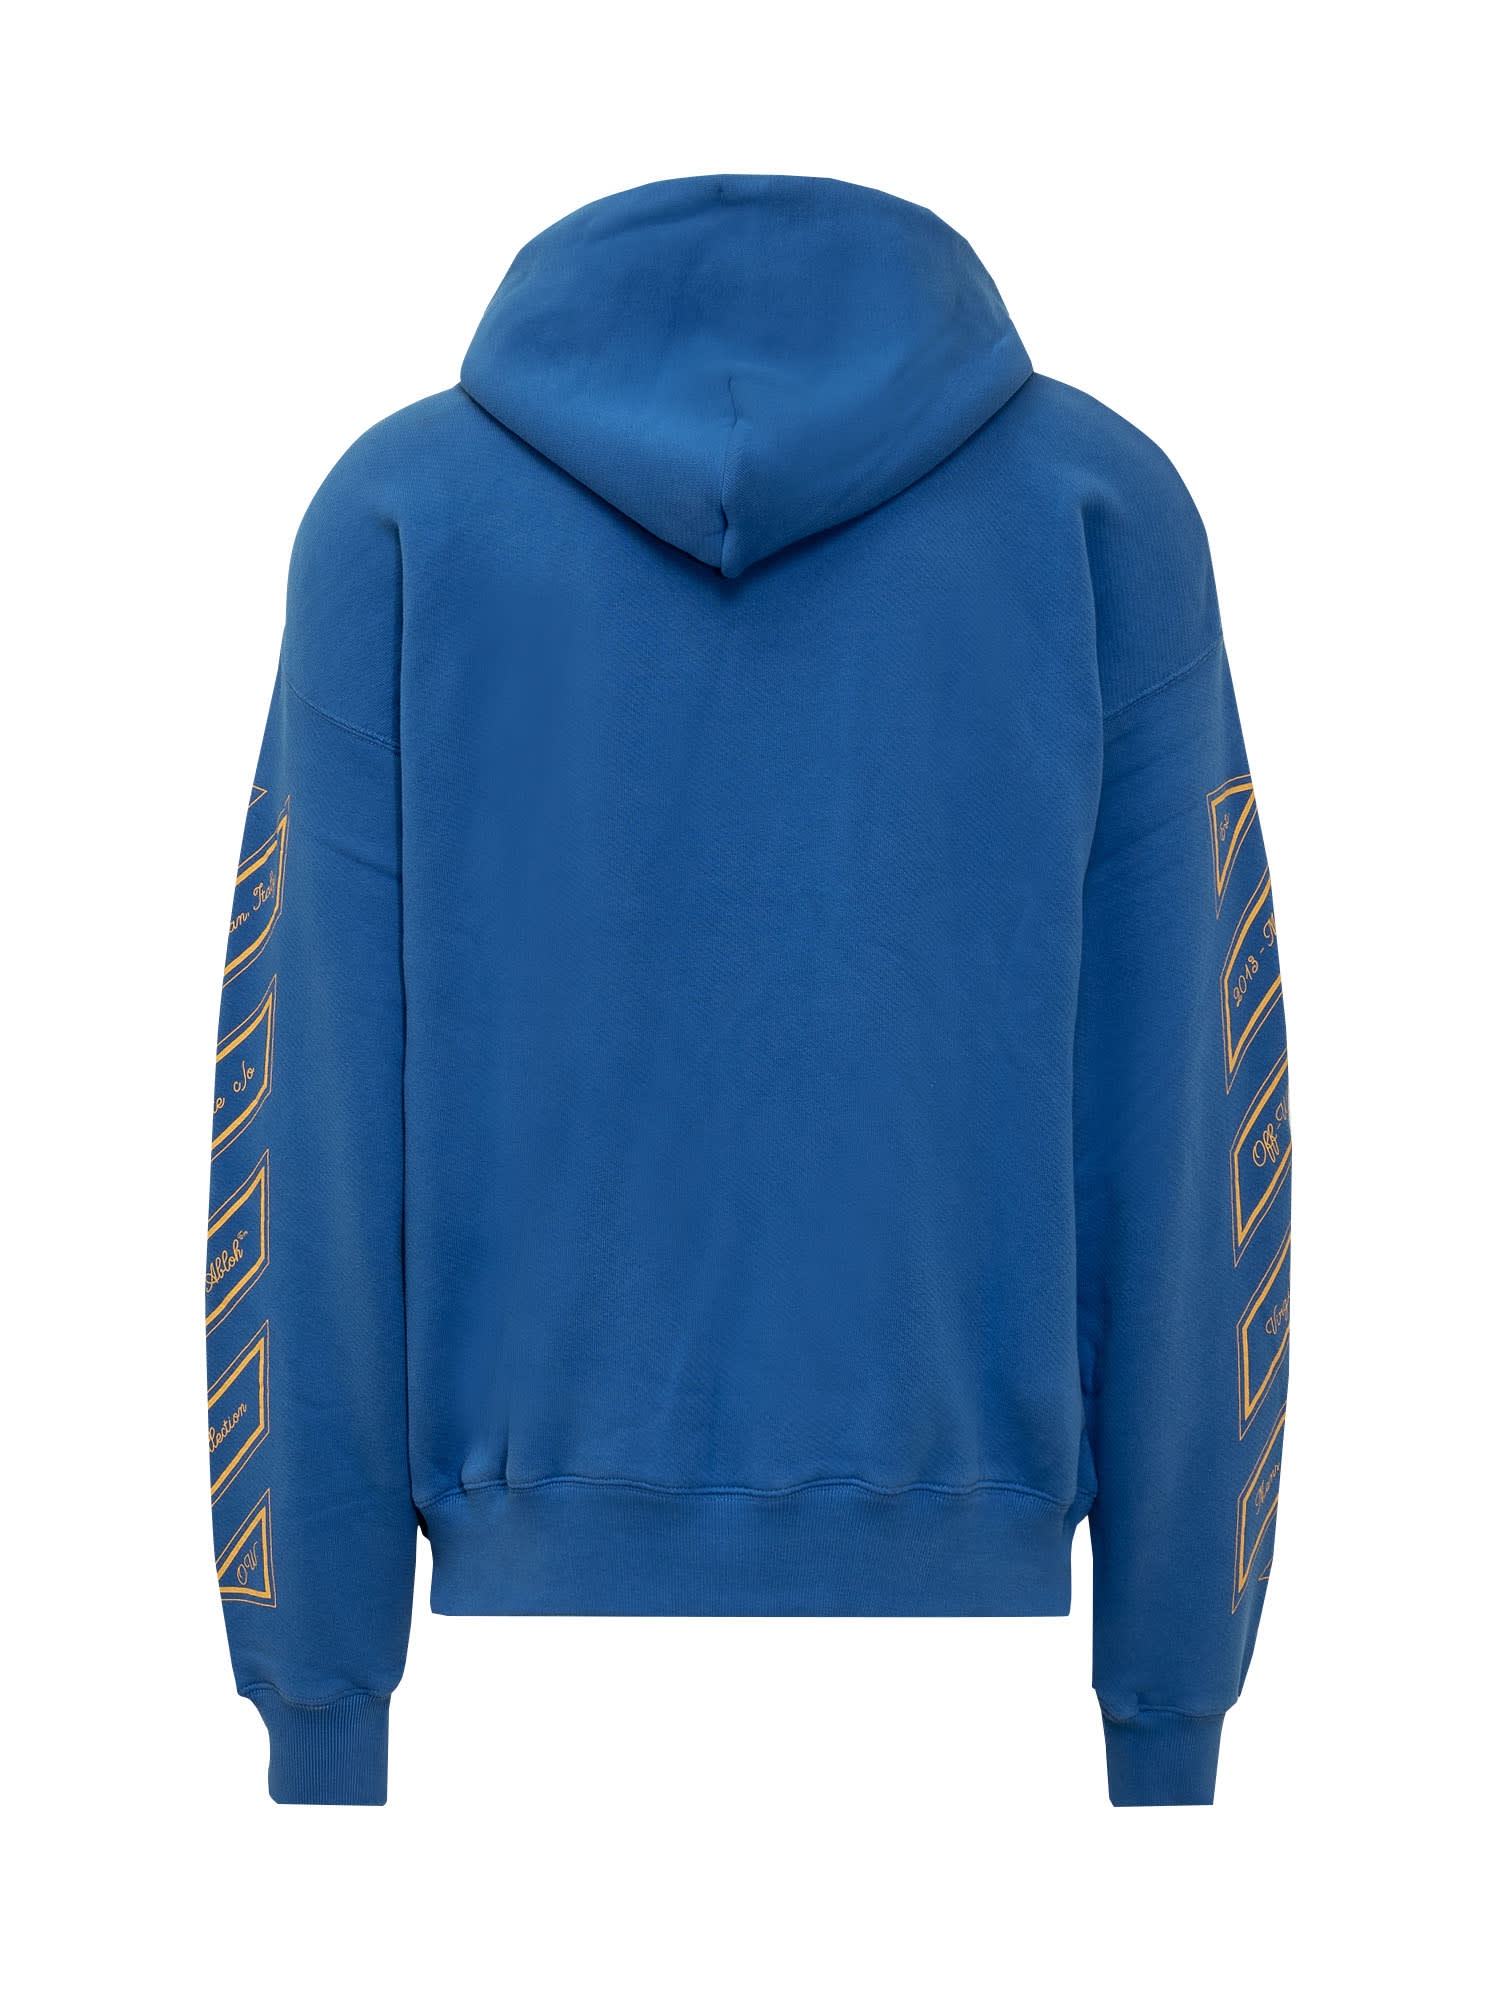 Shop Off-white Ow 23 Skate Hoodie In Blue Gold